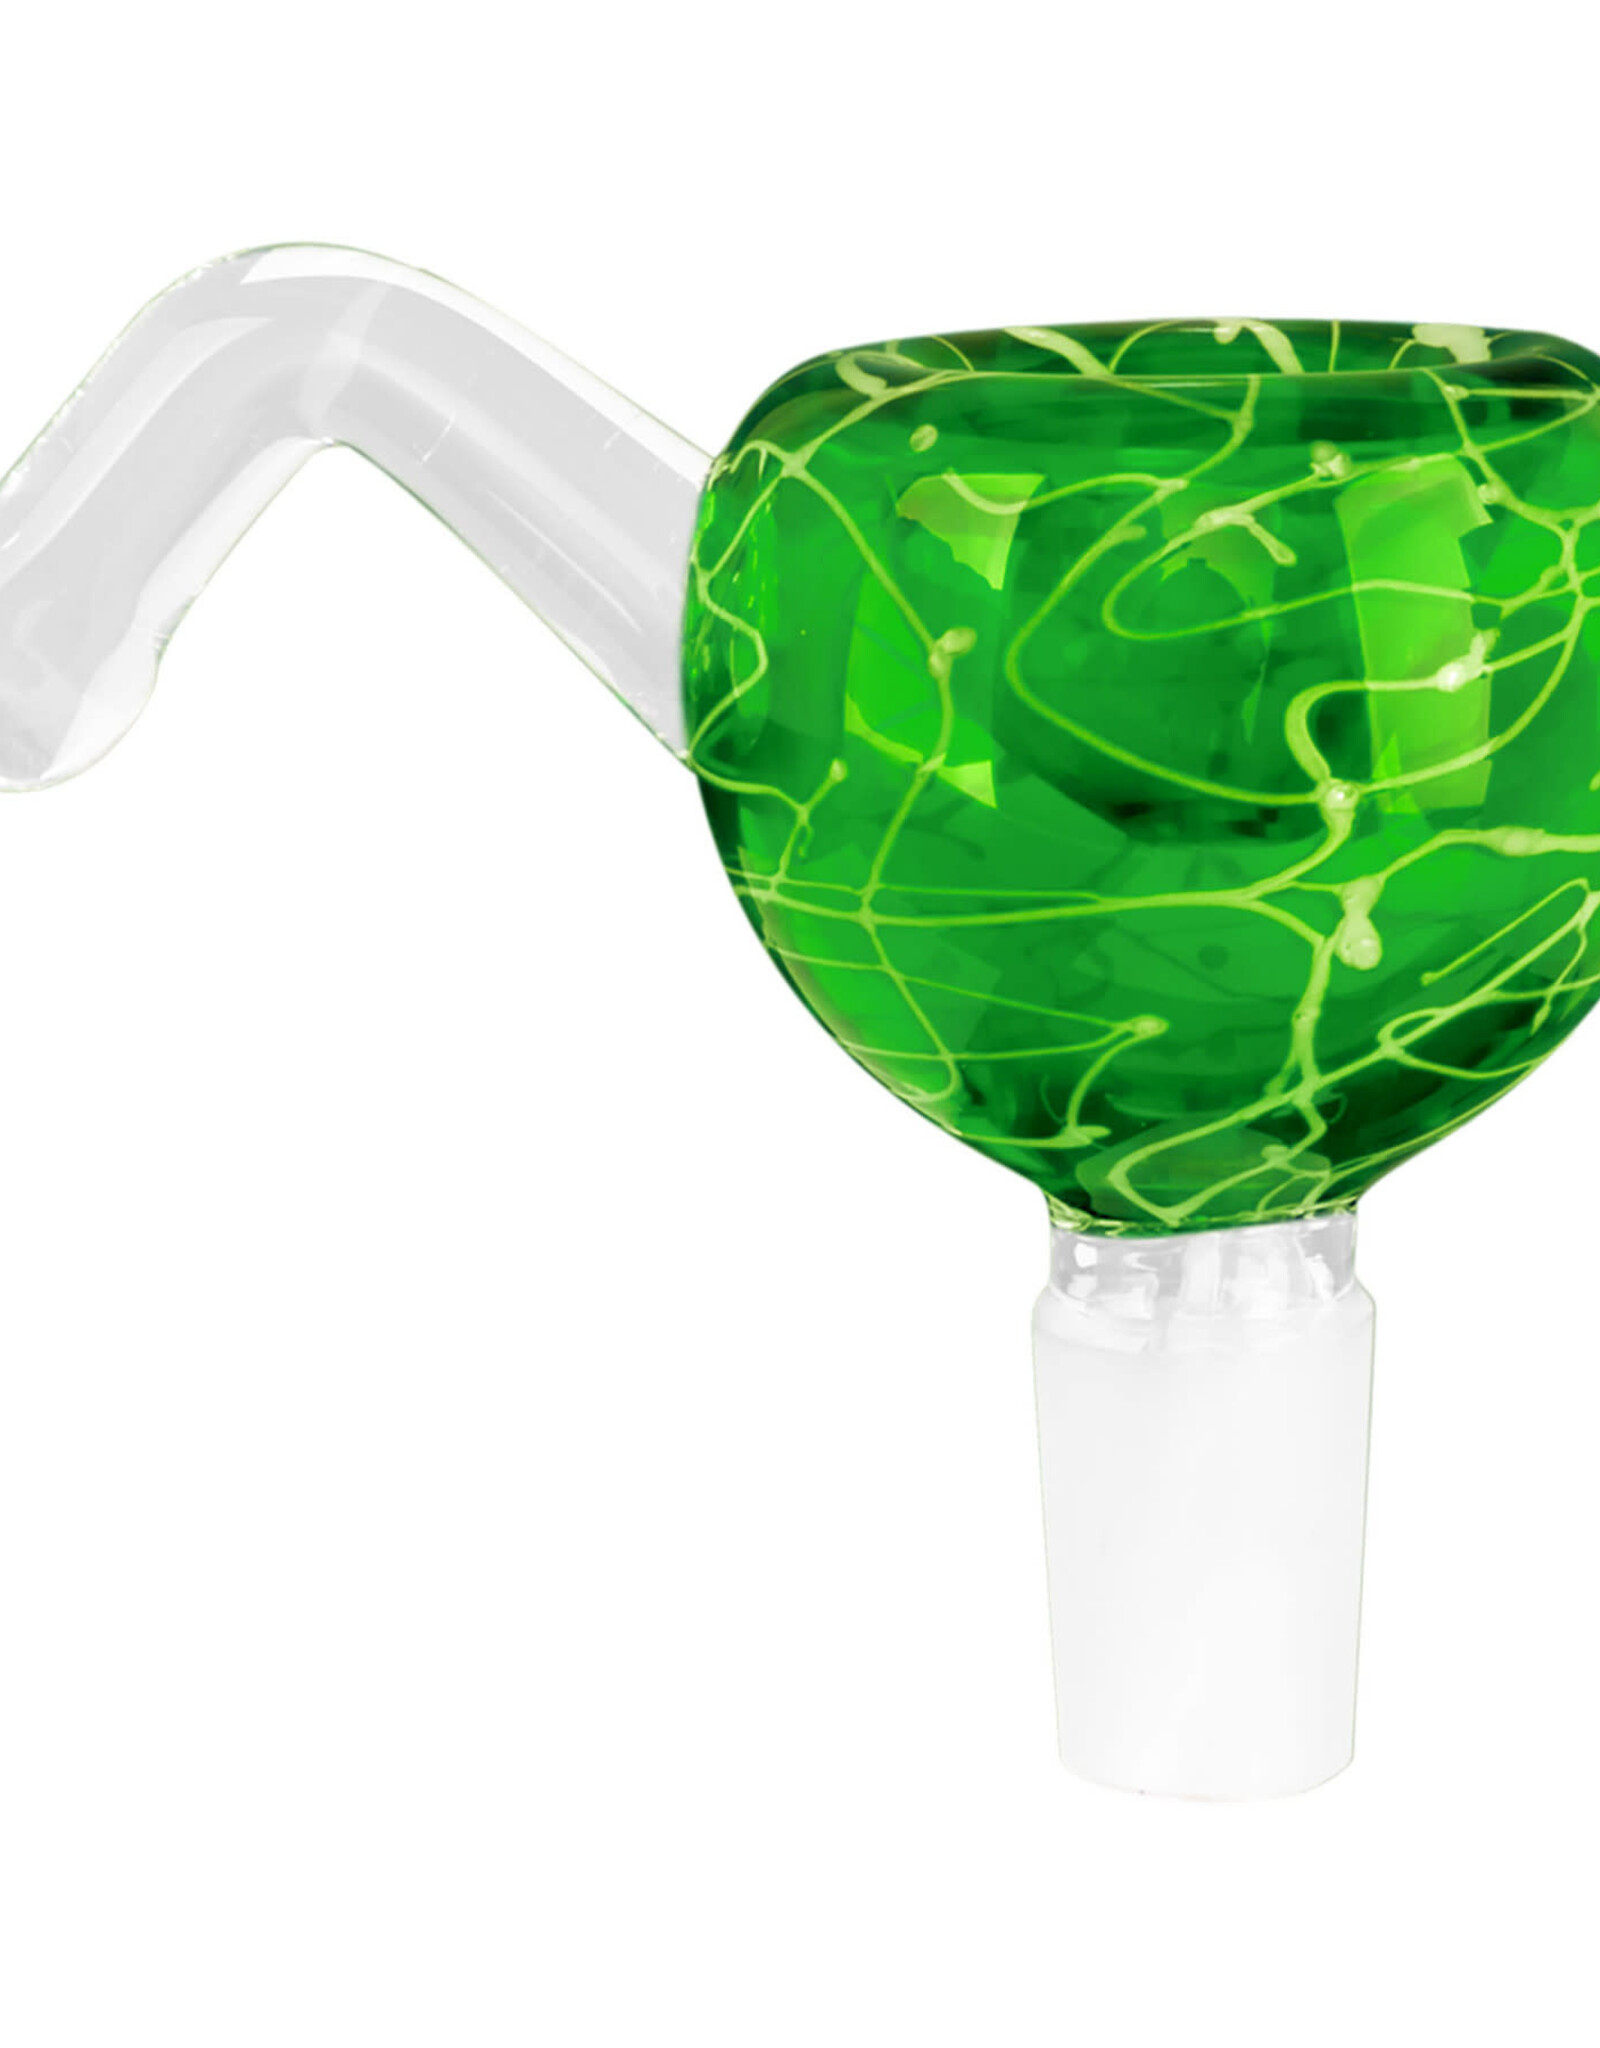 Red Eye Glass 14mm Van Halen Pull-Out GREEN/WHITE